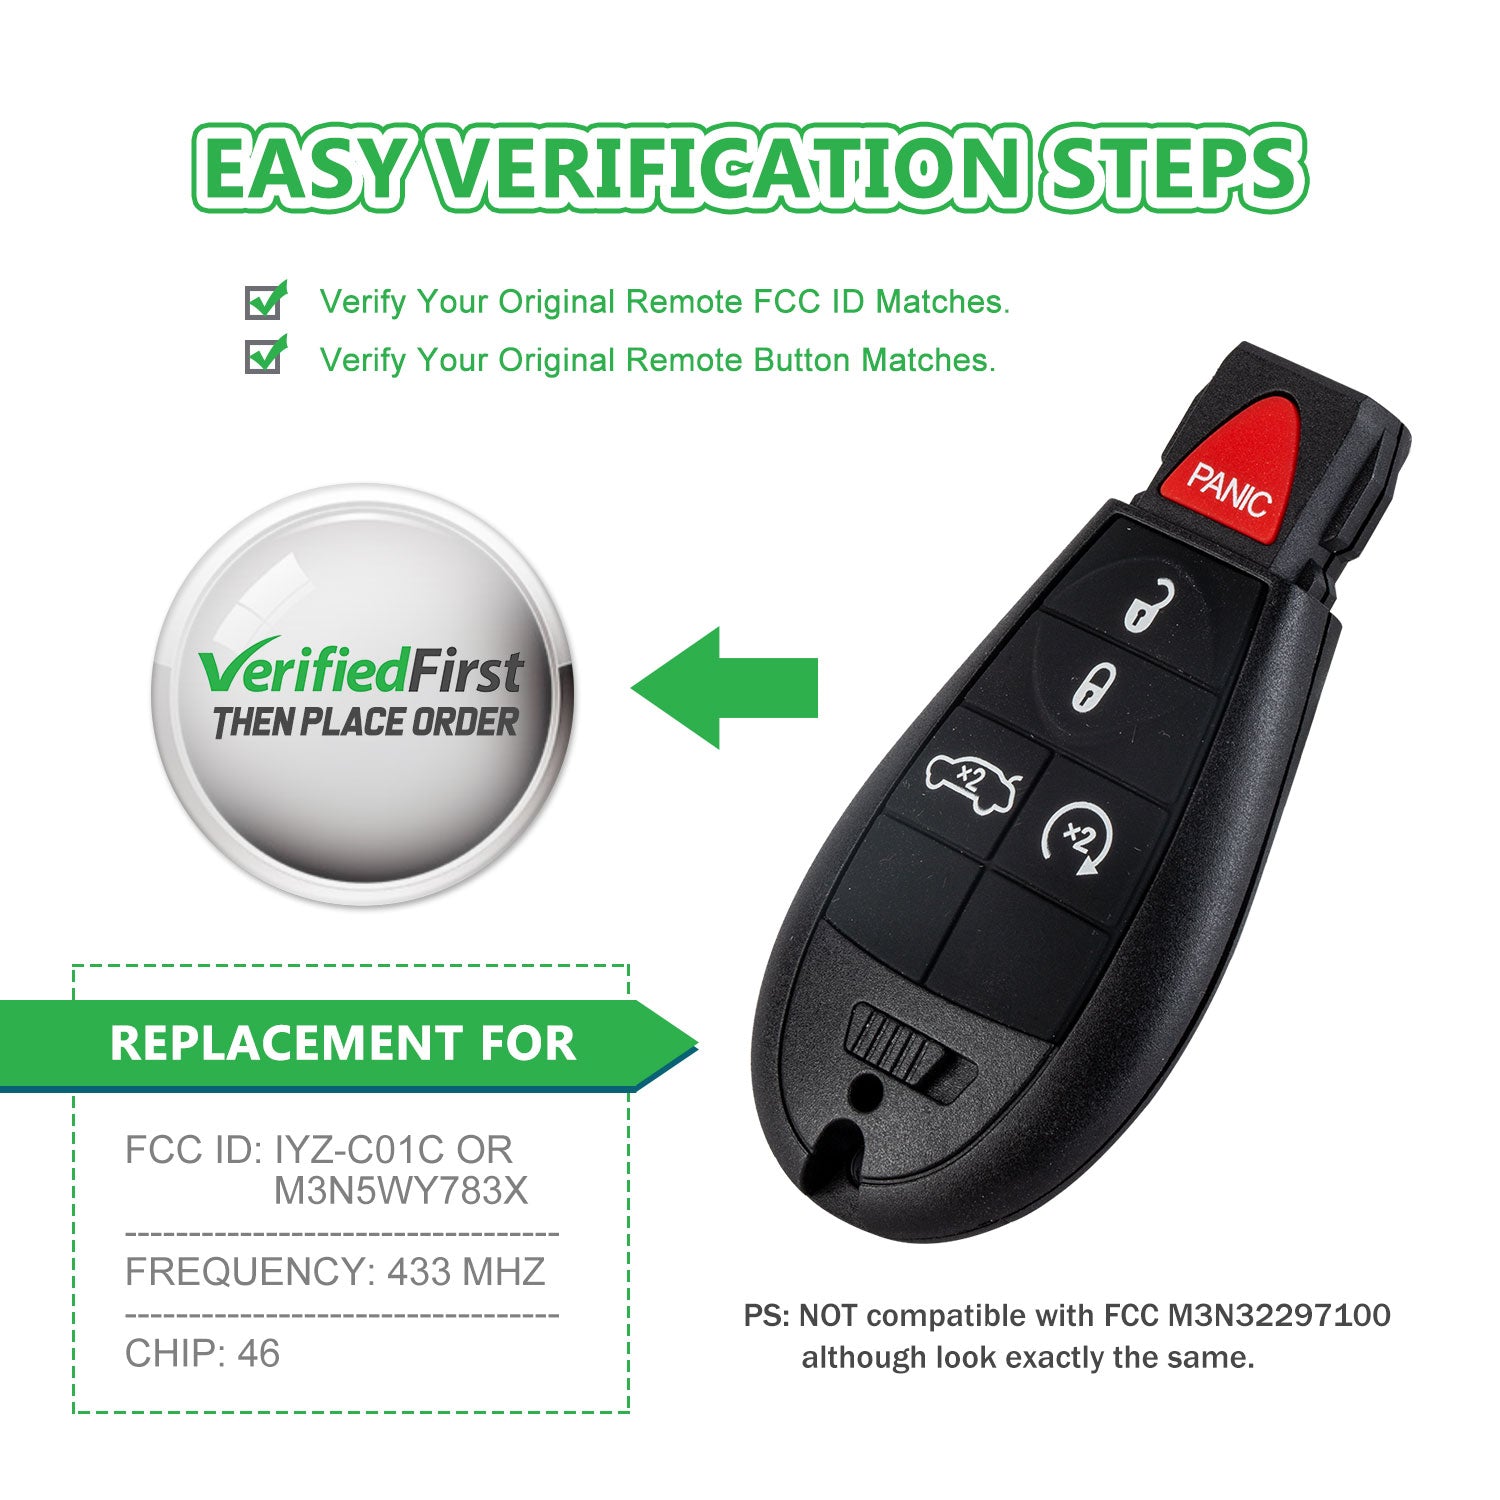 Extra-Partss Remote Car Key Fob Replacement for Dodge IYZ-C01C or M3N5WY783X fits 2008 2009 2010 2011 2012 2013 Durango 5 Button